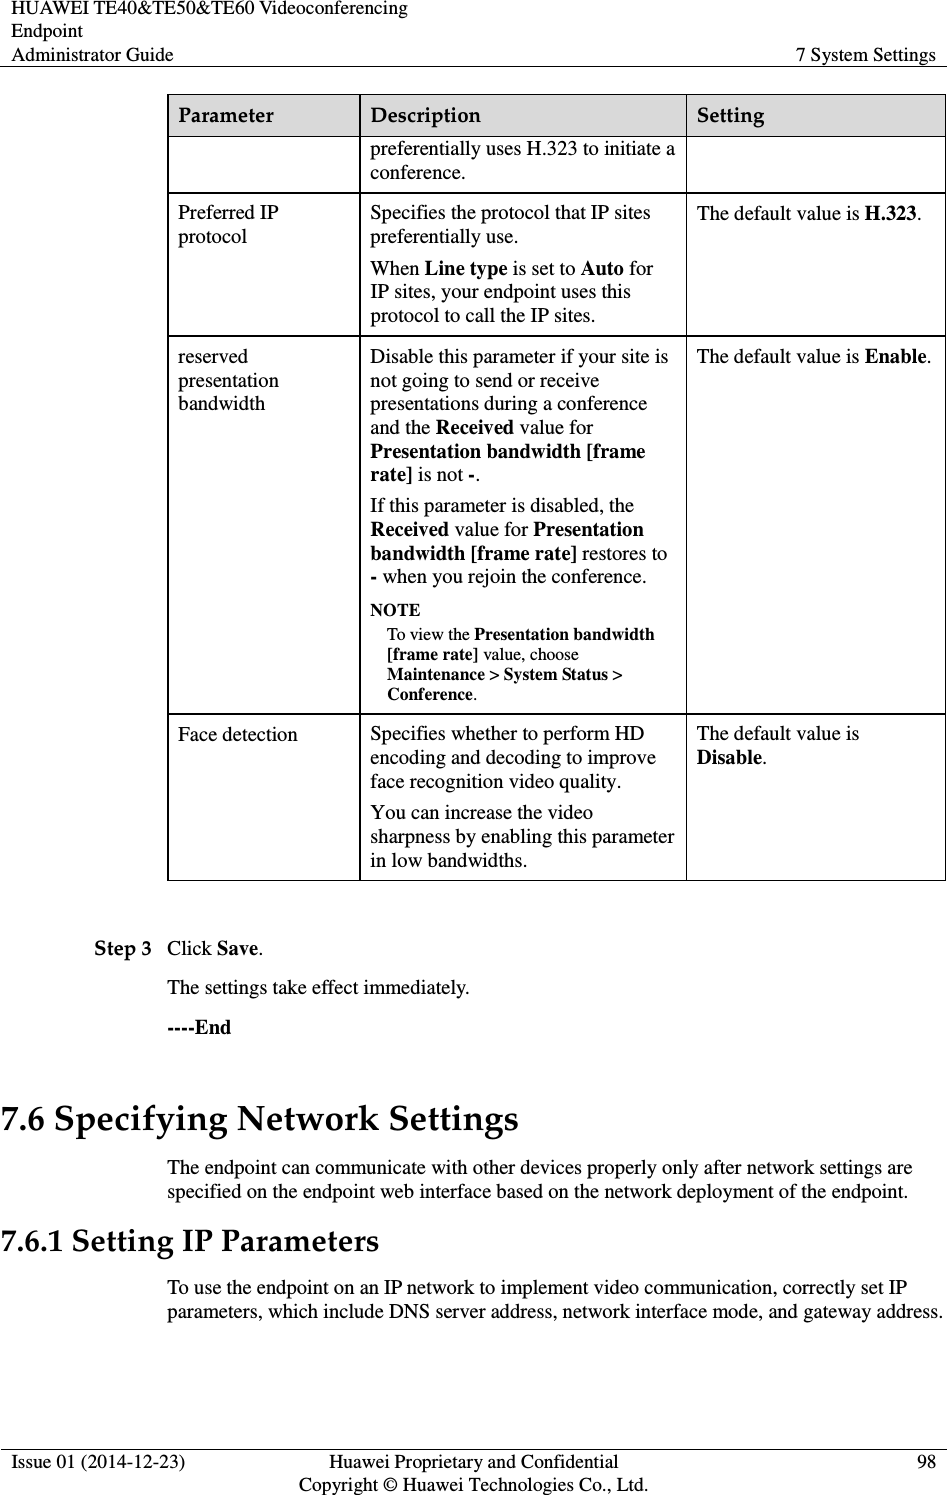 HUAWEI TE40&amp;TE50&amp;TE60 Videoconferencing Endpoint Administrator Guide  7 System Settings  Issue 01 (2014-12-23)  Huawei Proprietary and Confidential                                     Copyright © Huawei Technologies Co., Ltd. 98  Parameter  Description  Setting preferentially uses H.323 to initiate a conference. Preferred IP protocol Specifies the protocol that IP sites preferentially use.   When Line type is set to Auto for IP sites, your endpoint uses this protocol to call the IP sites. The default value is H.323. reserved presentation bandwidth Disable this parameter if your site is not going to send or receive presentations during a conference and the Received value for Presentation bandwidth [frame rate] is not -. If this parameter is disabled, the Received value for Presentation bandwidth [frame rate] restores to - when you rejoin the conference. NOTE To view the Presentation bandwidth [frame rate] value, choose Maintenance &gt; System Status &gt; Conference. The default value is Enable. Face detection  Specifies whether to perform HD encoding and decoding to improve face recognition video quality. You can increase the video sharpness by enabling this parameter in low bandwidths. The default value is Disable.  Step 3 Click Save.   The settings take effect immediately.   ----End 7.6 Specifying Network Settings The endpoint can communicate with other devices properly only after network settings are specified on the endpoint web interface based on the network deployment of the endpoint. 7.6.1 Setting IP Parameters To use the endpoint on an IP network to implement video communication, correctly set IP parameters, which include DNS server address, network interface mode, and gateway address. 